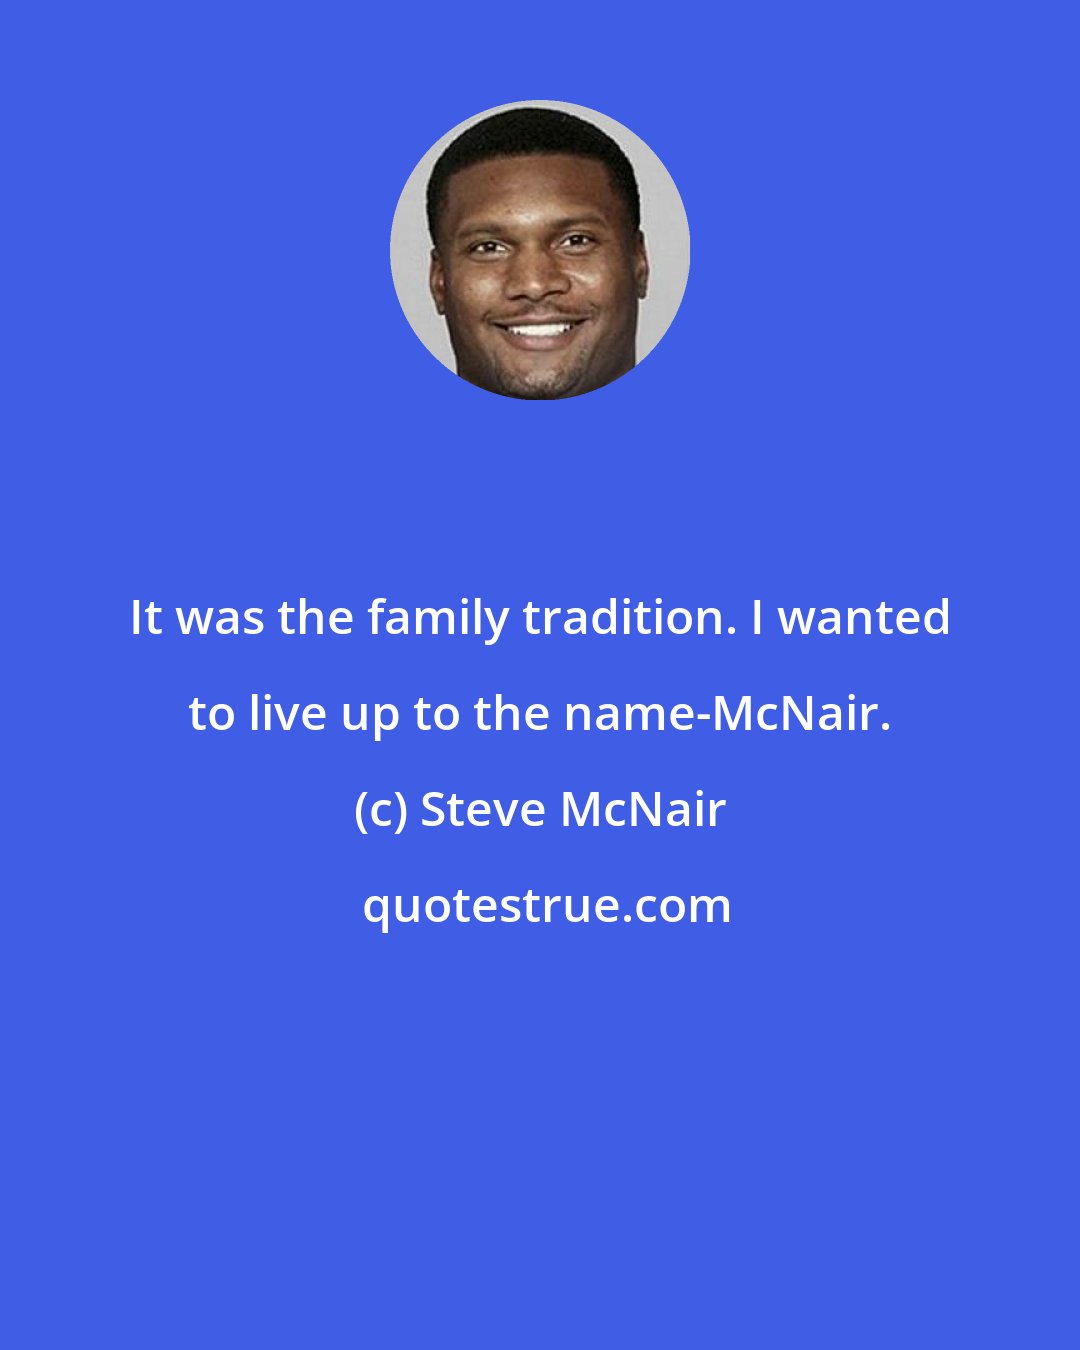 Steve McNair: It was the family tradition. I wanted to live up to the name-McNair.